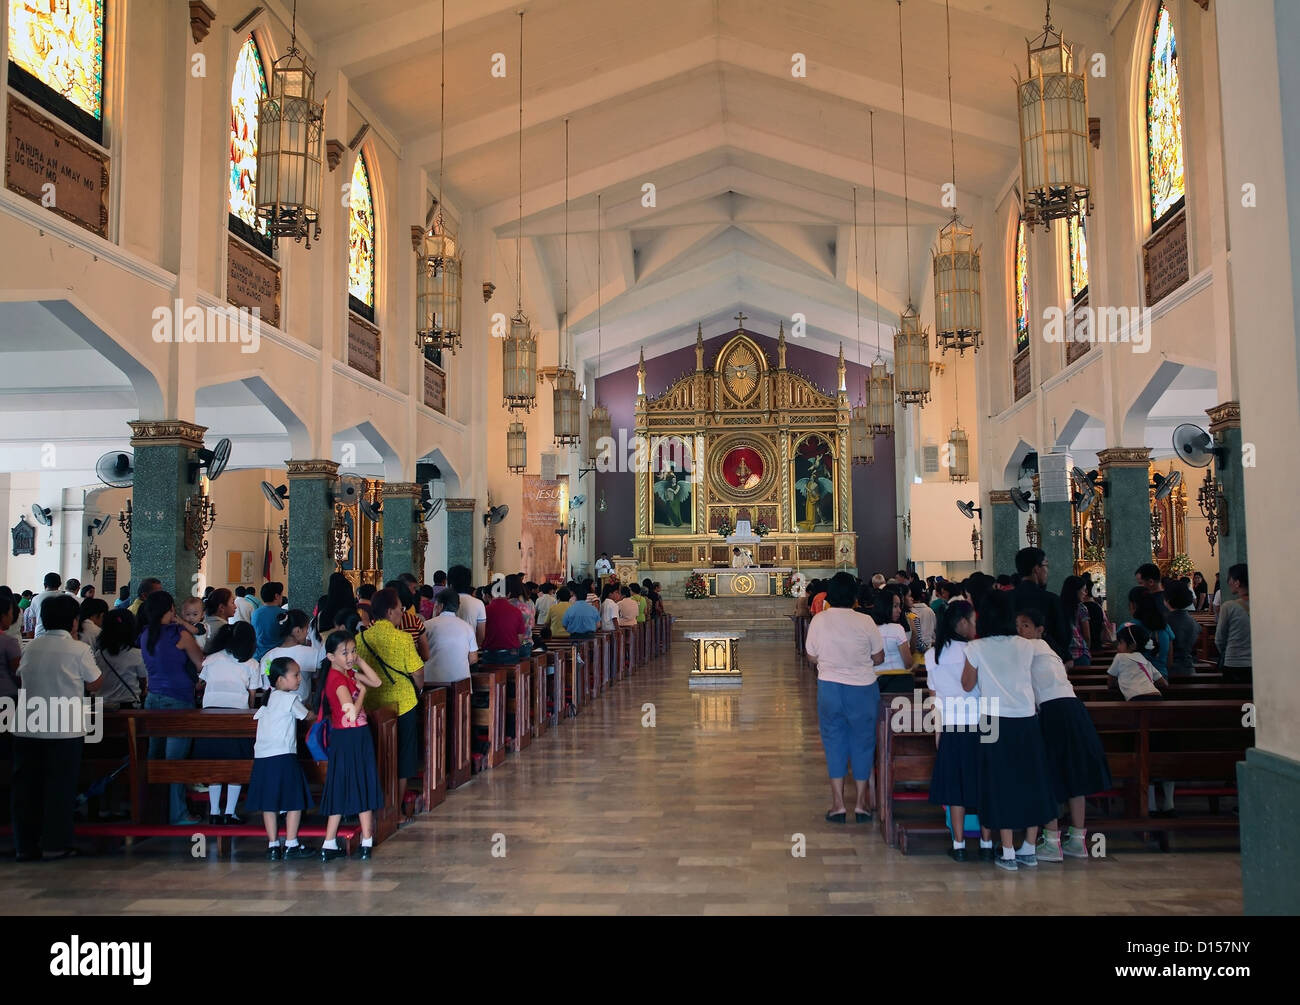 People praying in the Catholic church in Tacloban, Leyte. Stock Photo